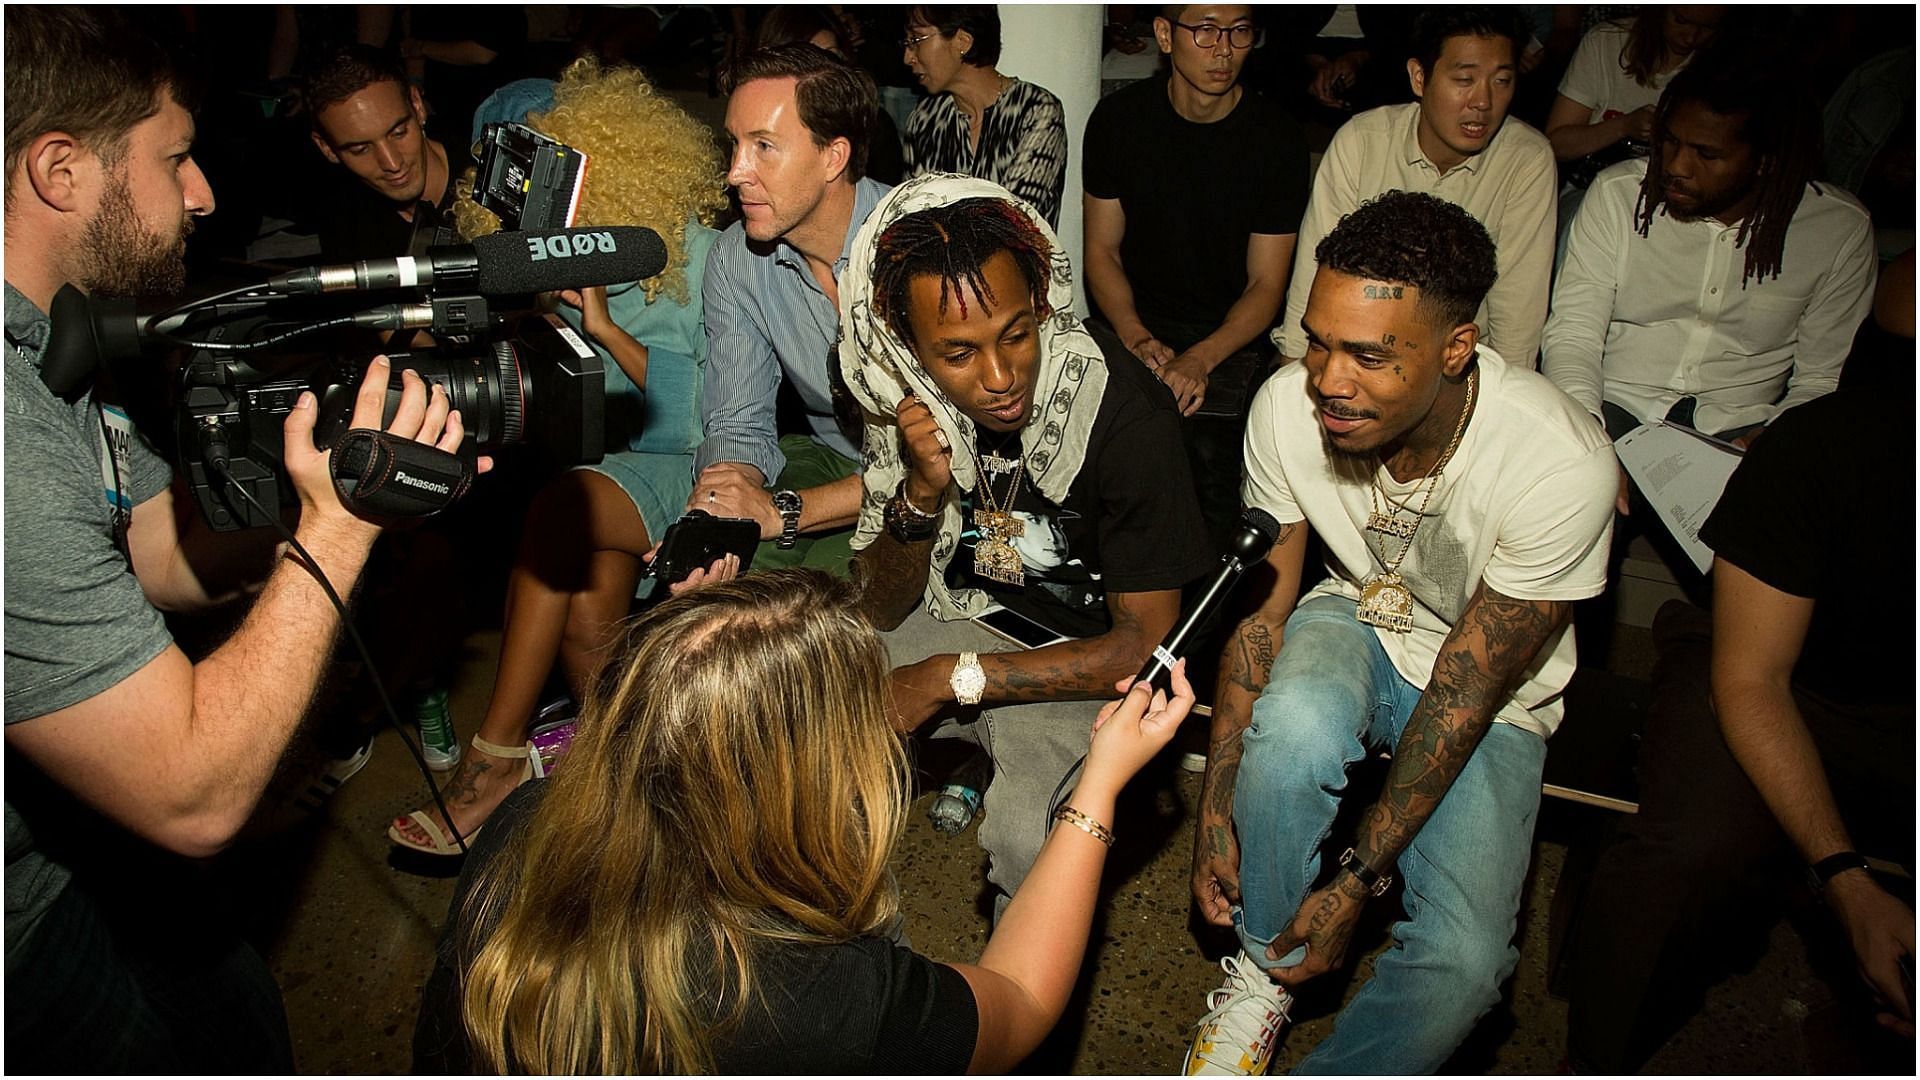 Rich the kid and Rapper J Stash being interviewed before the Pyer Moss fashion show during MADE Fashion Week September 2016 at Milk Studios (Image via Colby Blount/Getty Images)